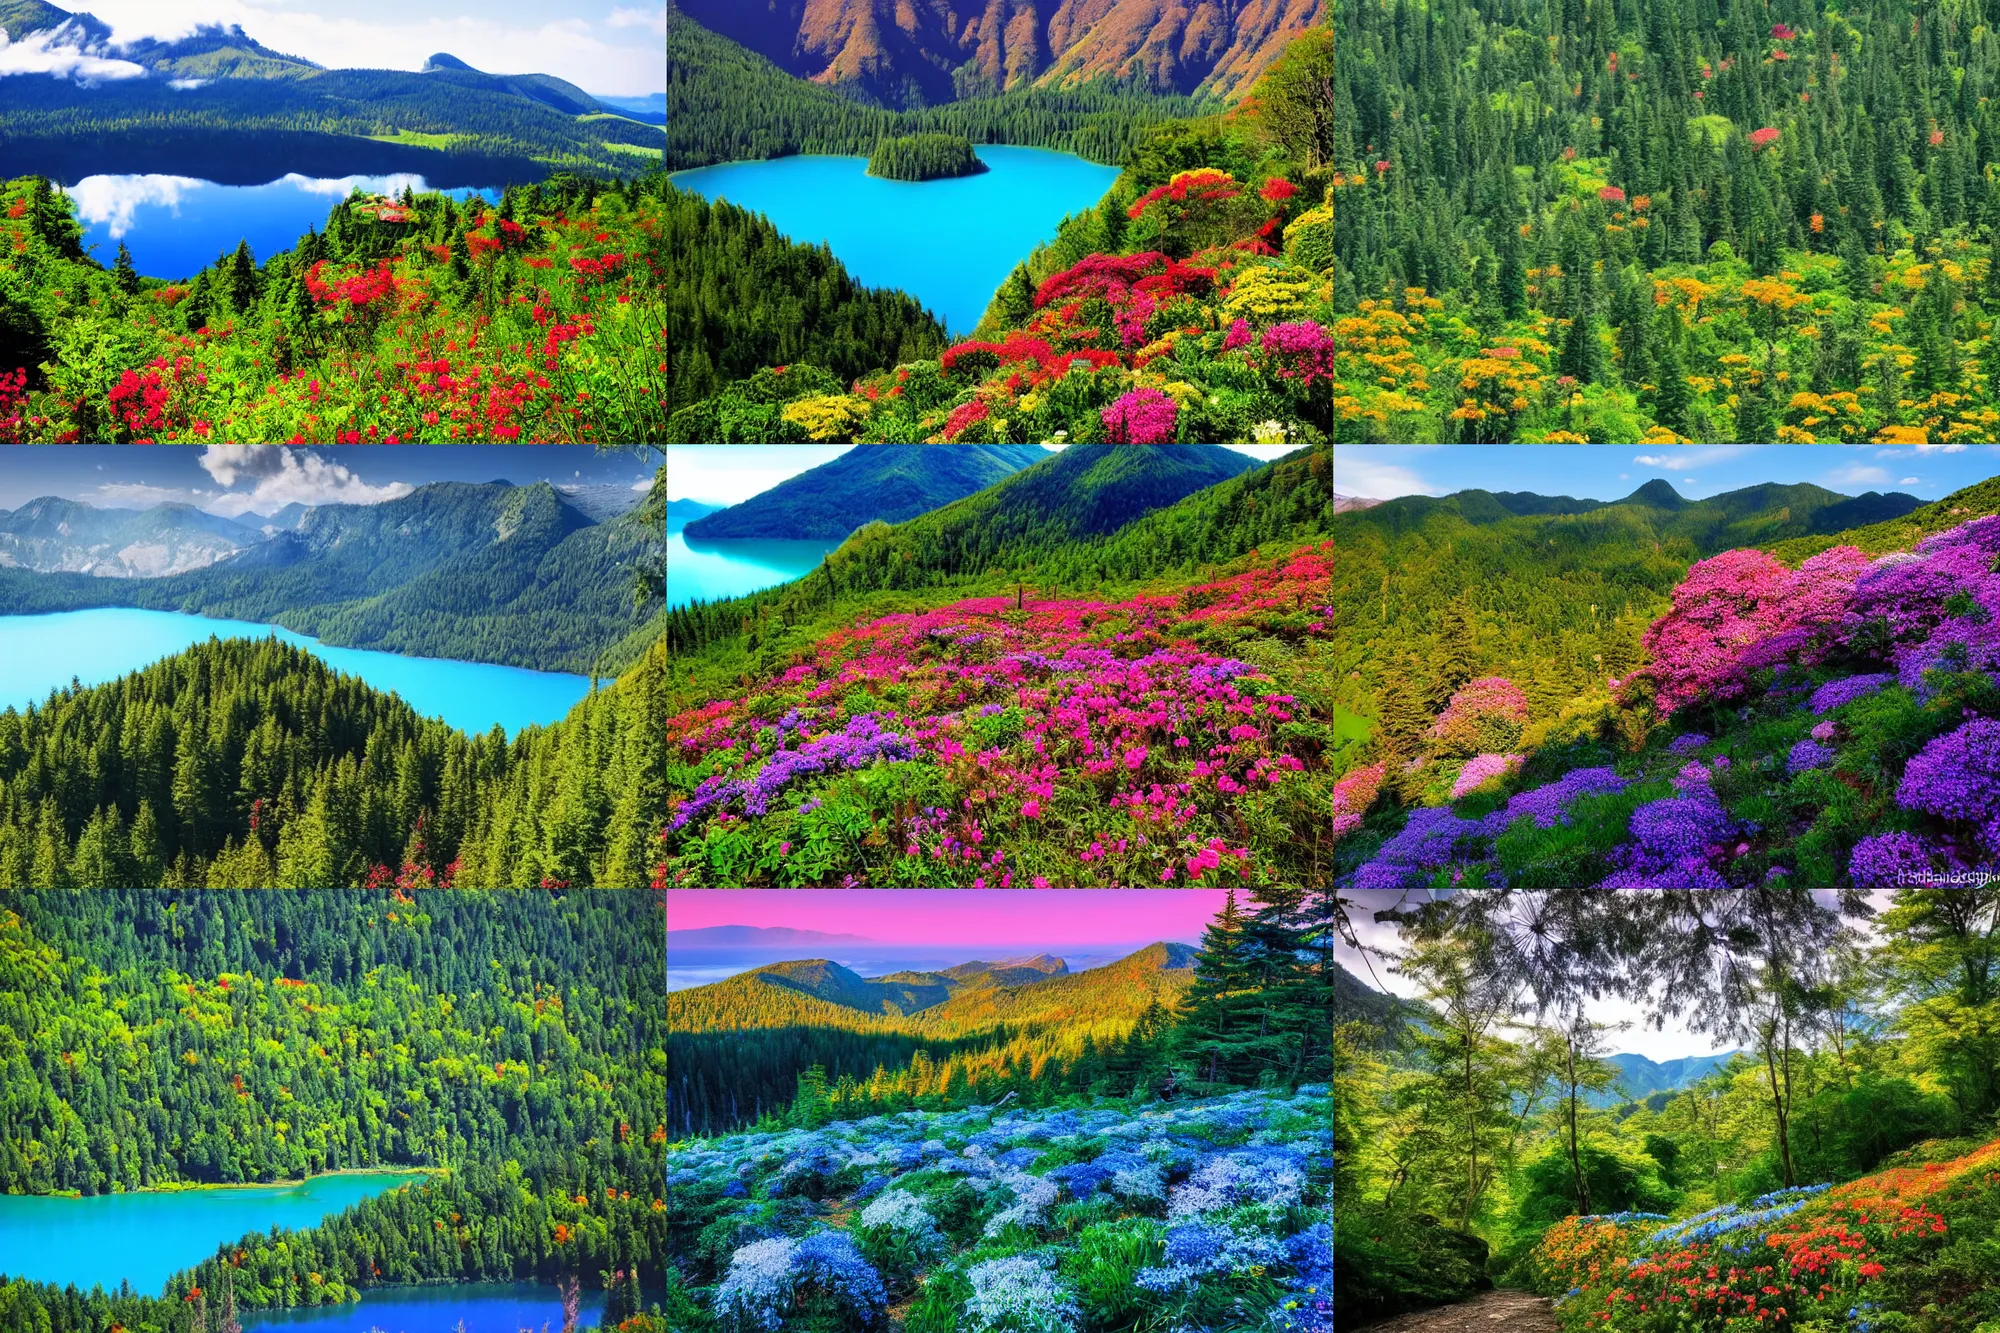 Prompt: a forest grove atop a tall mountain. Flowers in every colour bloom everywhere. A calm bright blue lake. The sun is shining. It is paradise on earth. Resplendent.